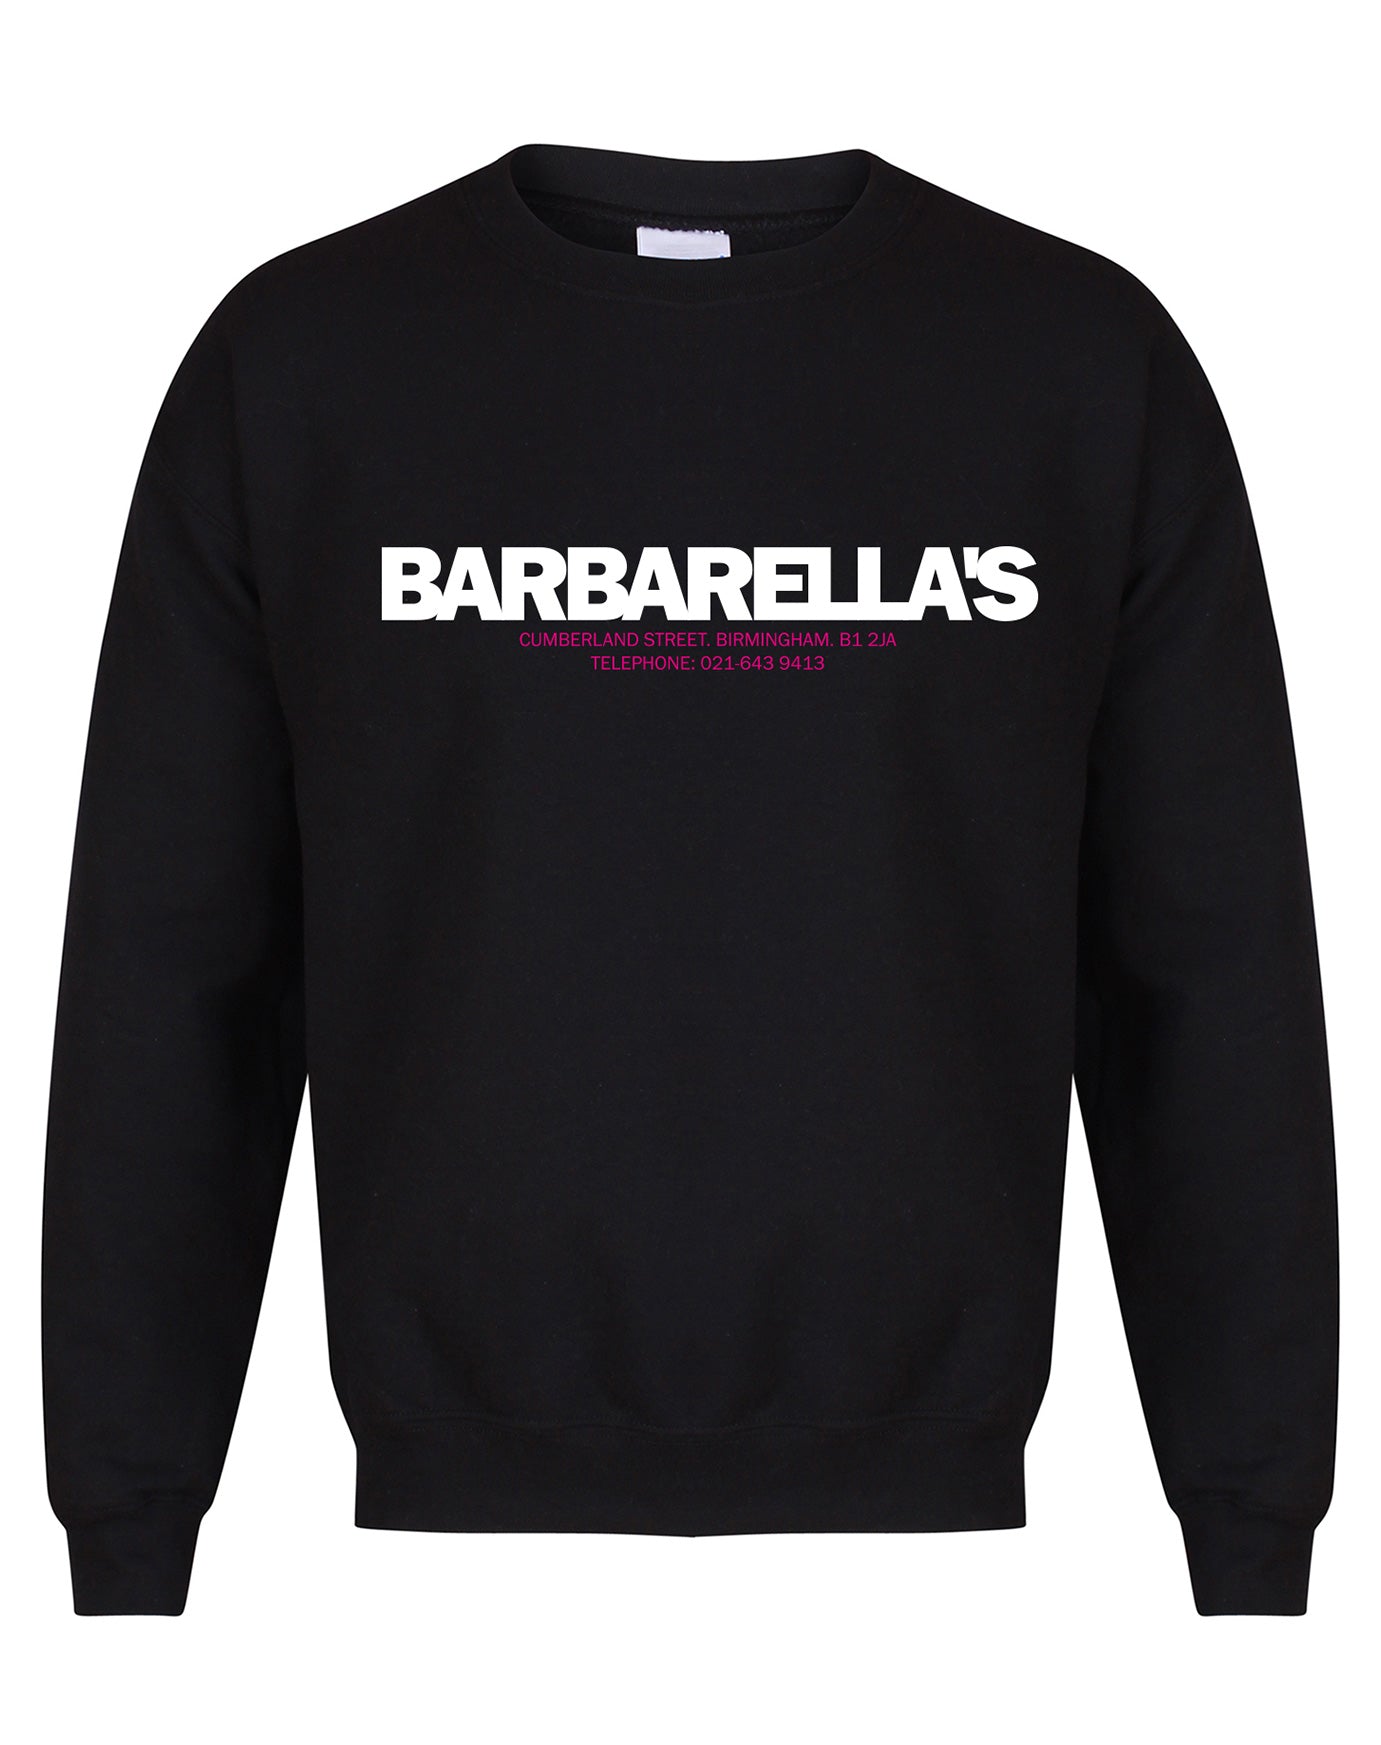 Barbarella's unisex fit sweatshirt - various colours - Dirty Stop Outs